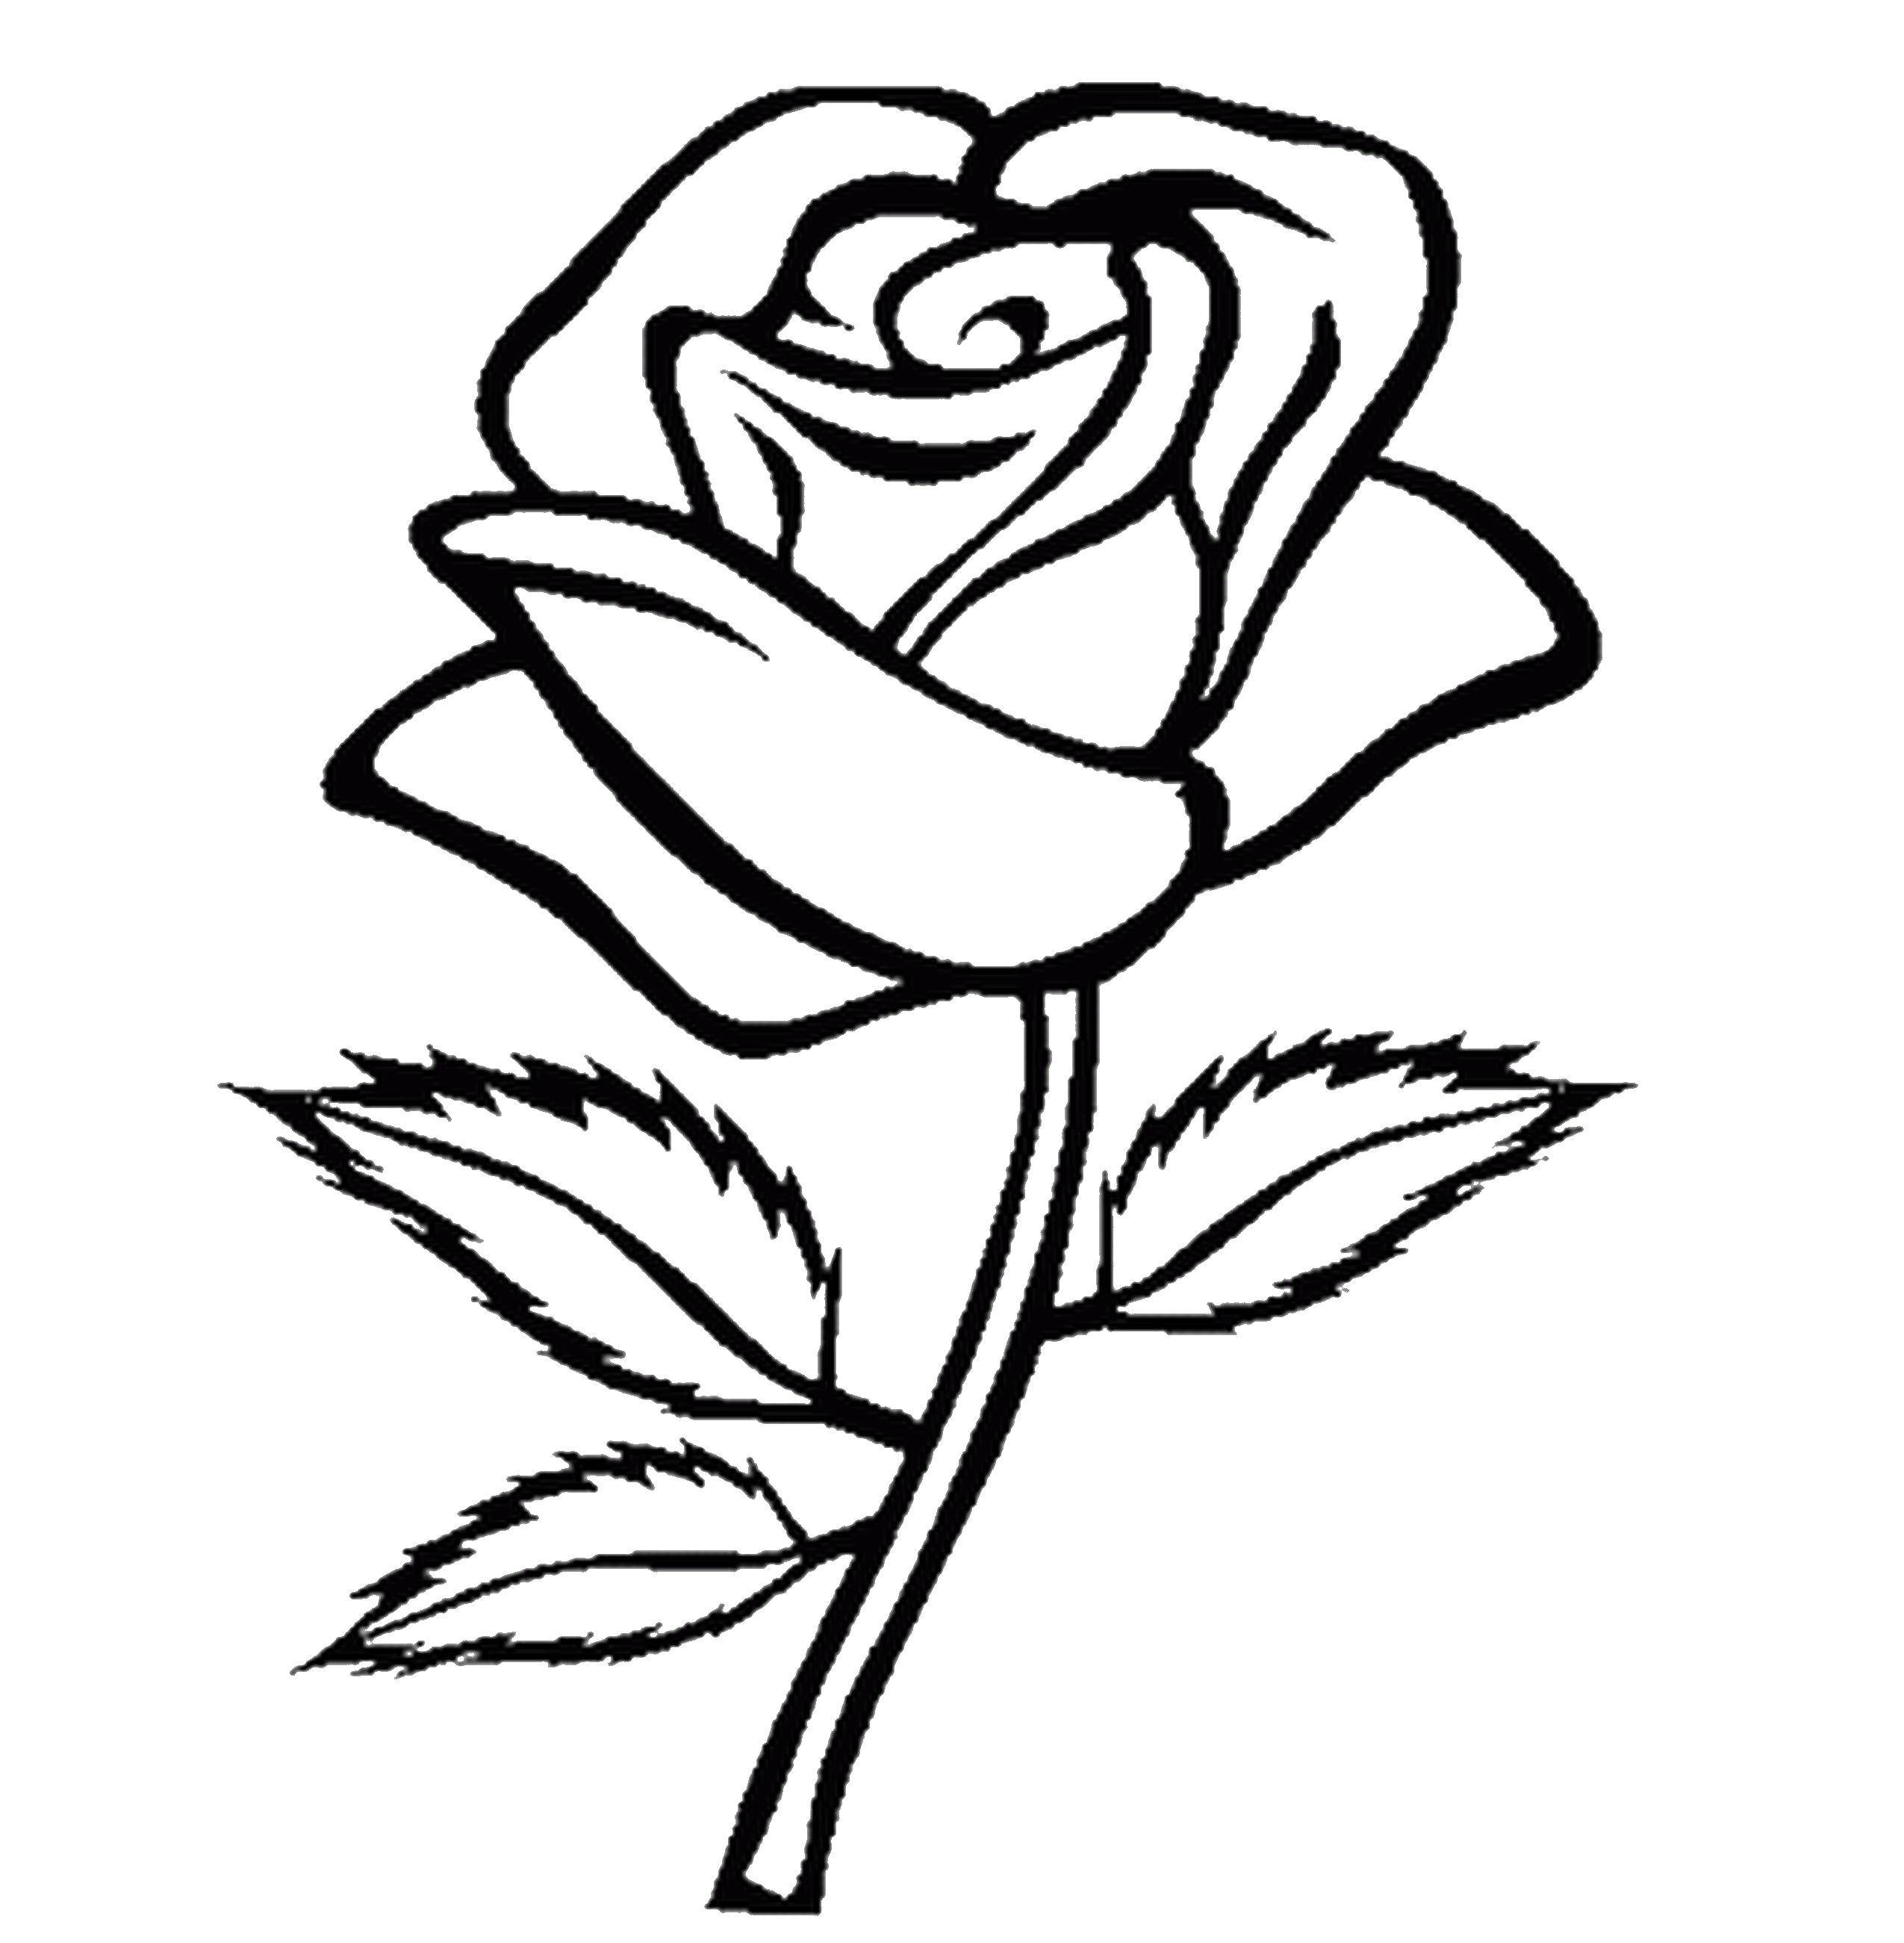 Coloring Rose. Category flowers. Tags:  flowers, plants, flower, rose.